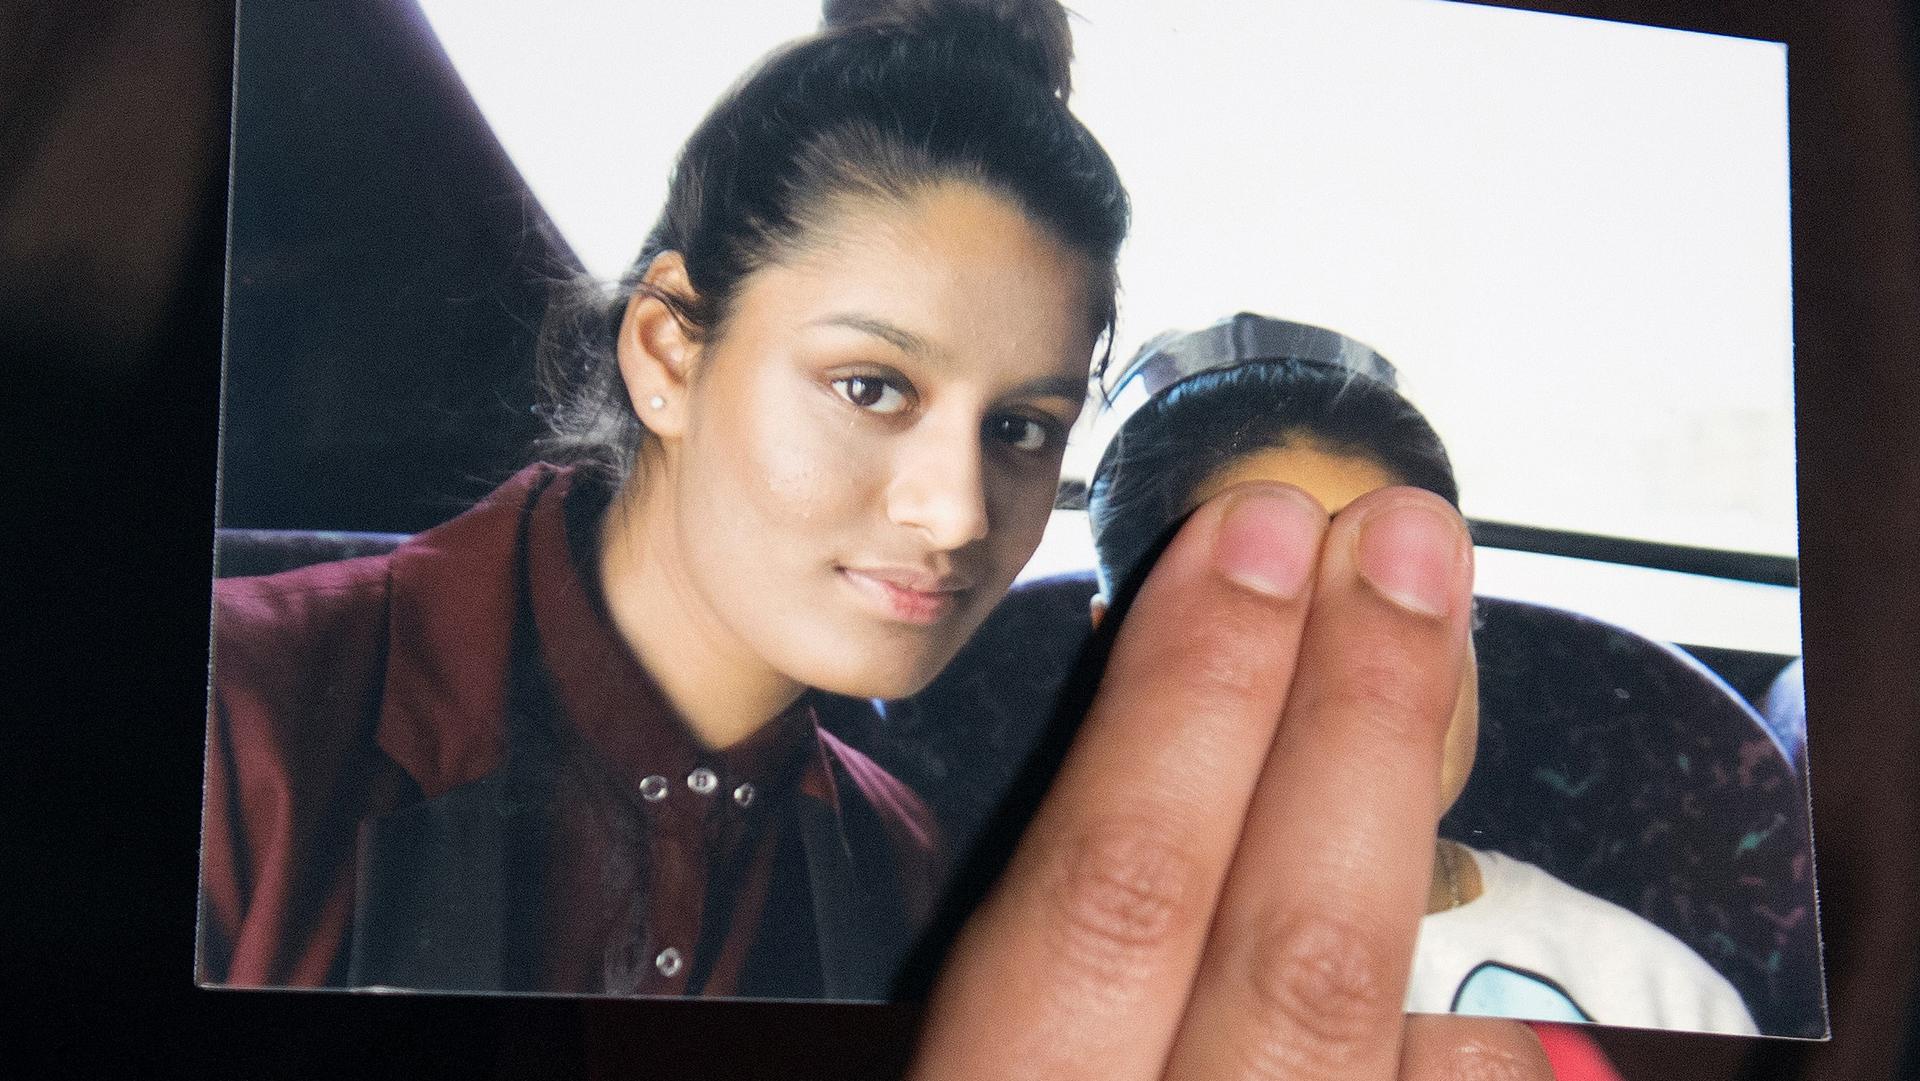 Renu Begum, sister of teenage British girl Shamima Begum who left the UK to join ISIS, holds a photo of her sister as she makes an appeal for Shemima to return home